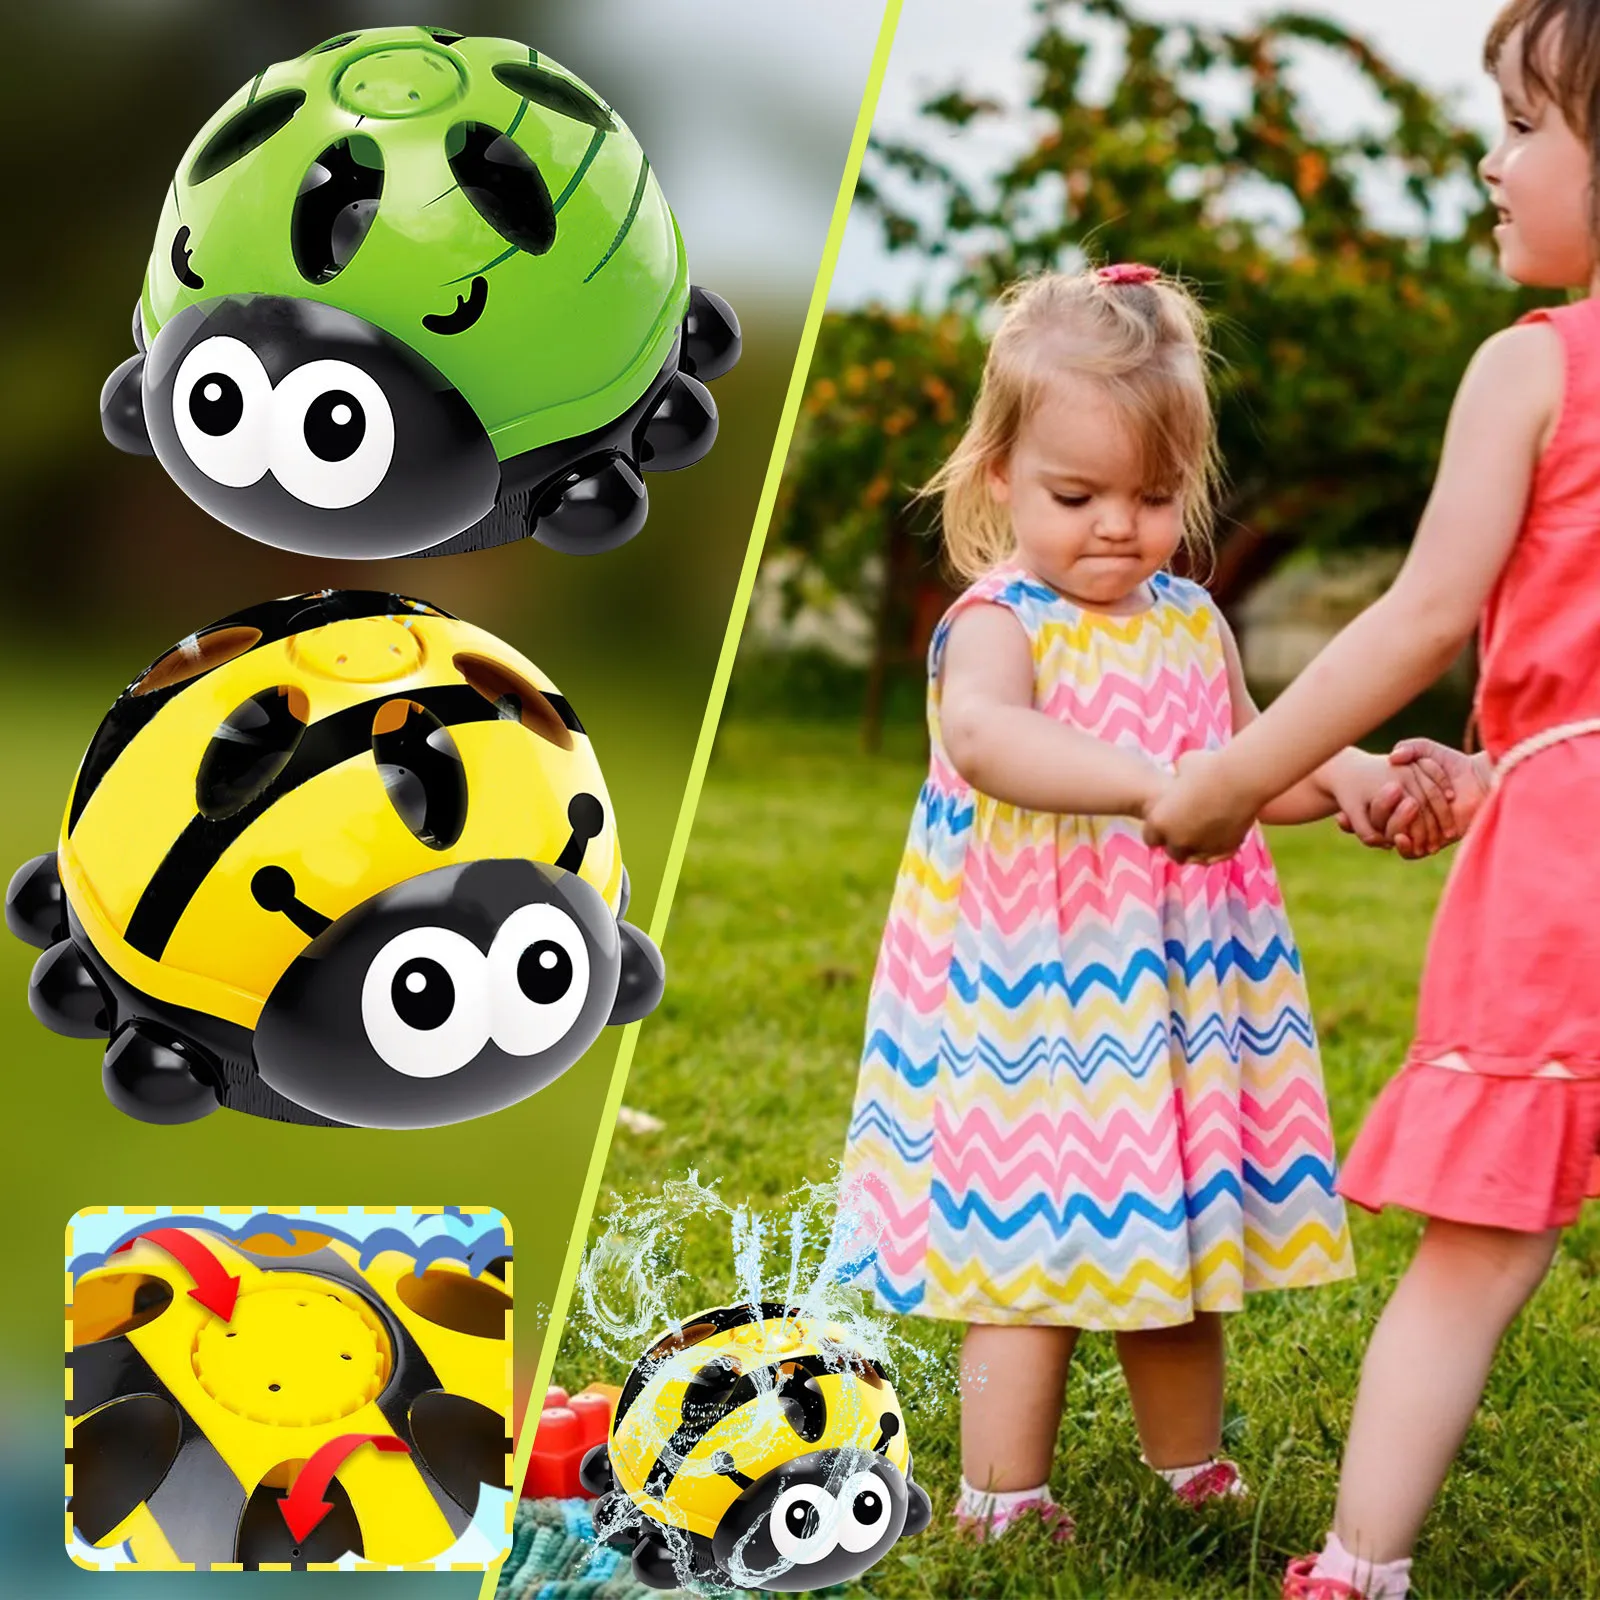 Childrens Water Spray Ladybird Toy Green/Yellow Outdoor Water Spray Sprinkler for Kids and Toddlers Portable Bathing Doll Toy for Bathroom Backyard 